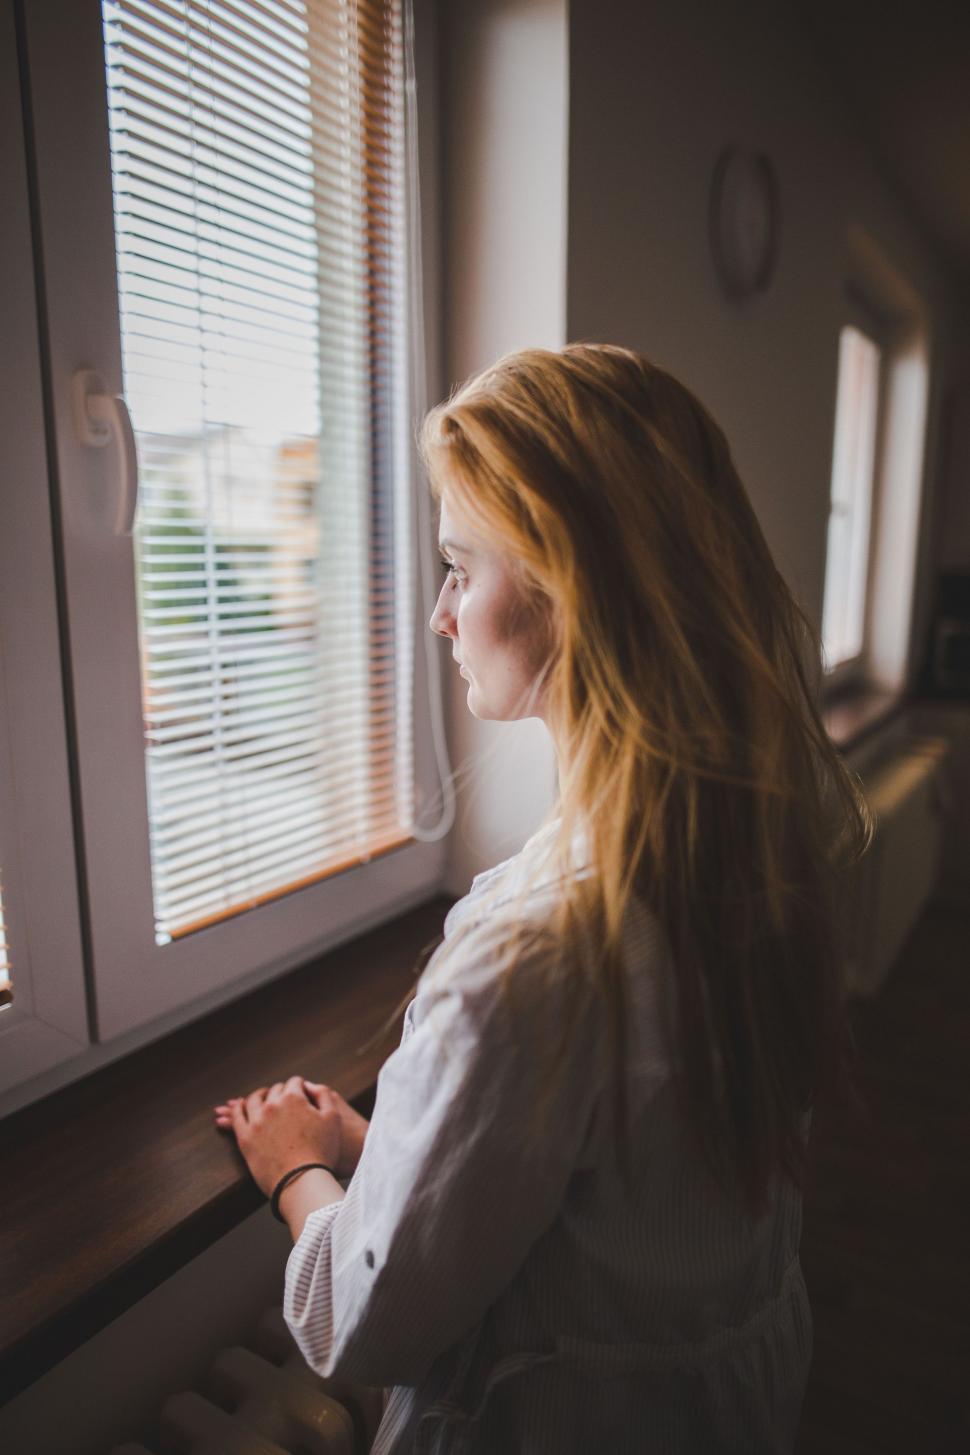 Free Image of Woman Looking Out a Window at the Outside 